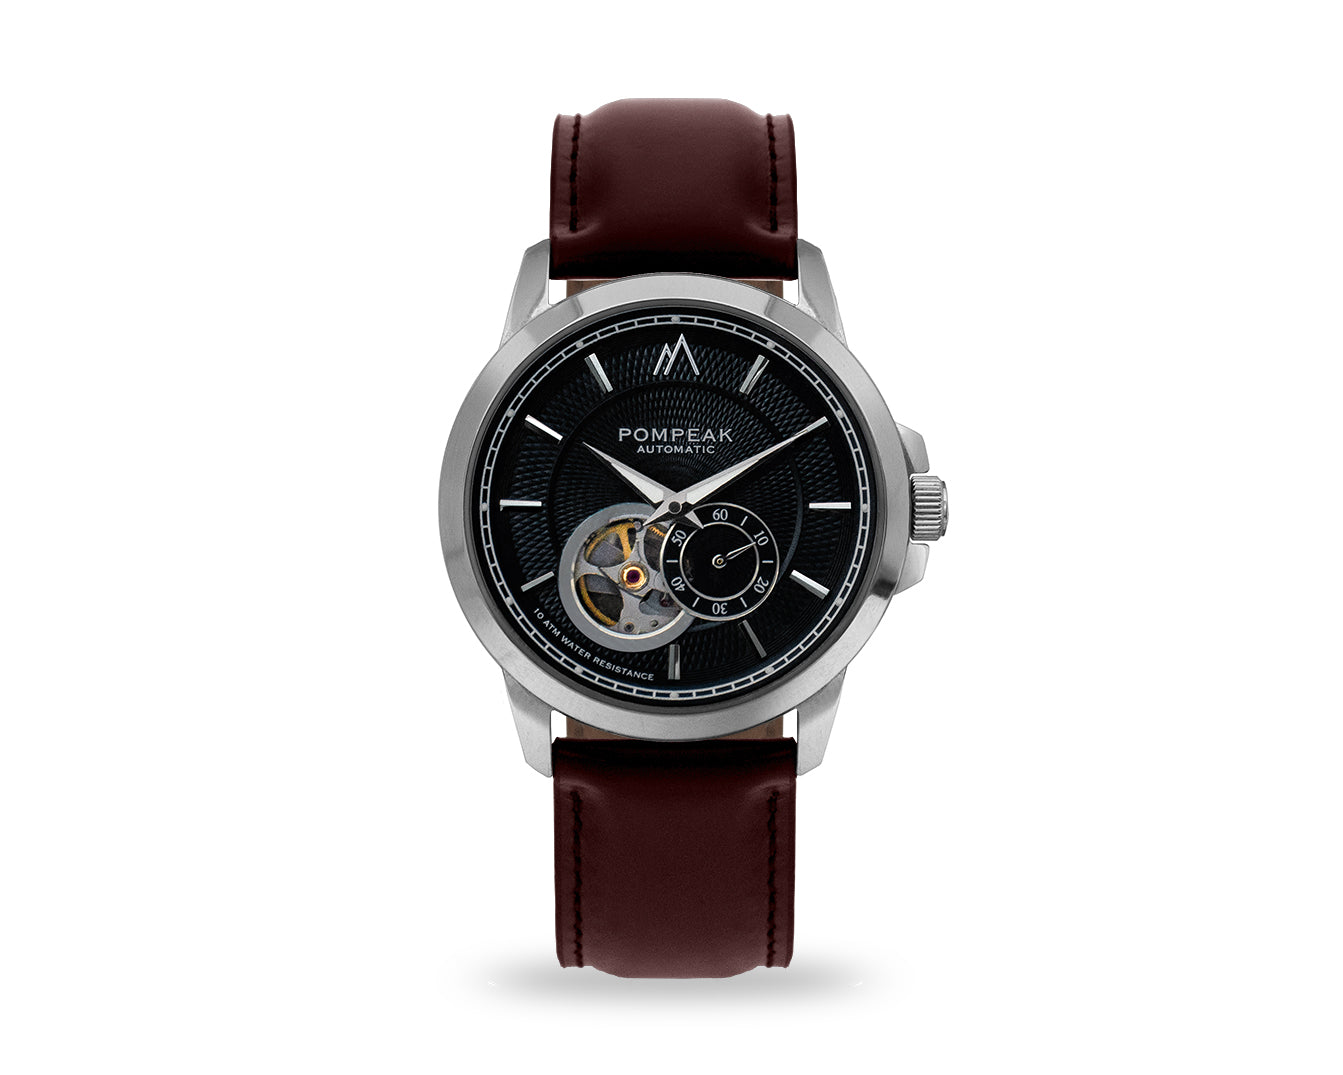 Pompeak automatic watch with full grain brown leather interchangeable strap.